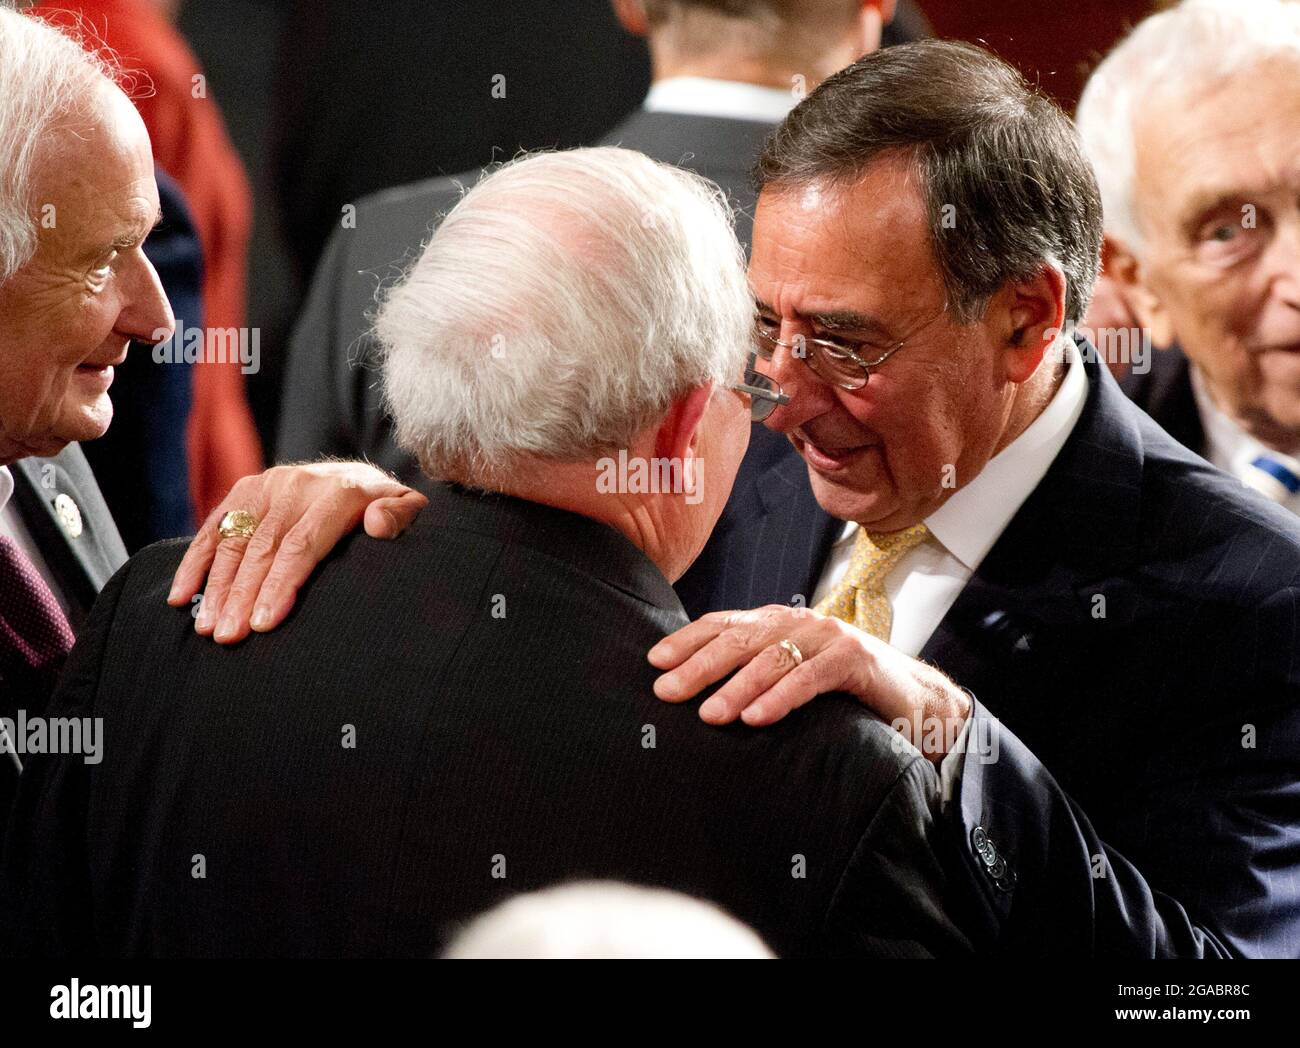 United States Secretary of Defense Leon Panetta shares a thought with U.S. Senator Carl Levin (Democrat of Michigan), Chairman of the U.S. Senate Armed Services Committee prior to President Barack Obama delivering his State of the Union Address to a Joint Session of Congress in the U.S. Capitol in Washington, D.C., Tuesday, January 24, 2012.  Looking on from left is U.S. Representative Sander Levin (Democrat of Michigan)..Credit: Ron Sachs / CNP/Sipa USA Stock Photo